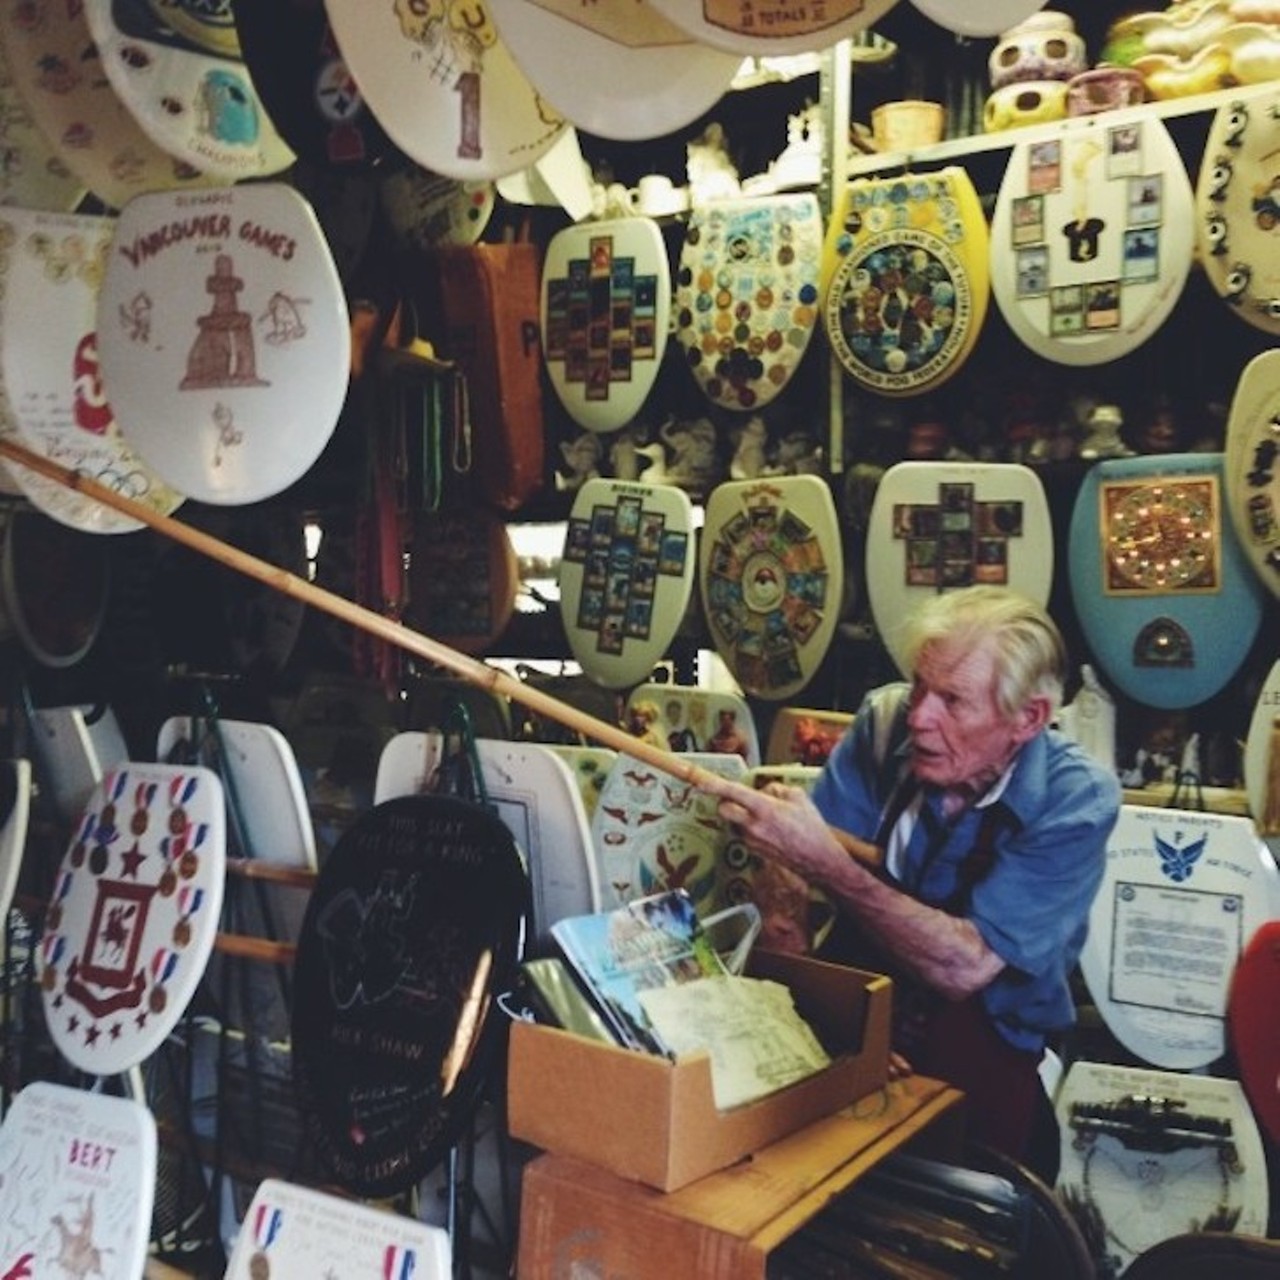 Barney Smith's Toilet Seat Art Museum
239 Abiso Ave., (210) 824-7791, facebook.com/SATXTSAM
Retired plummer Barney Smith opened up an exhibition of his hobby back in 1992 &#151; the art of emblazoned and adorned toilet seats, that is. But, be sure to give Barney a ring before stopping by to check out the commodes, as the museum doubles as his home. 
Photo via Instagram (designbyproxy)